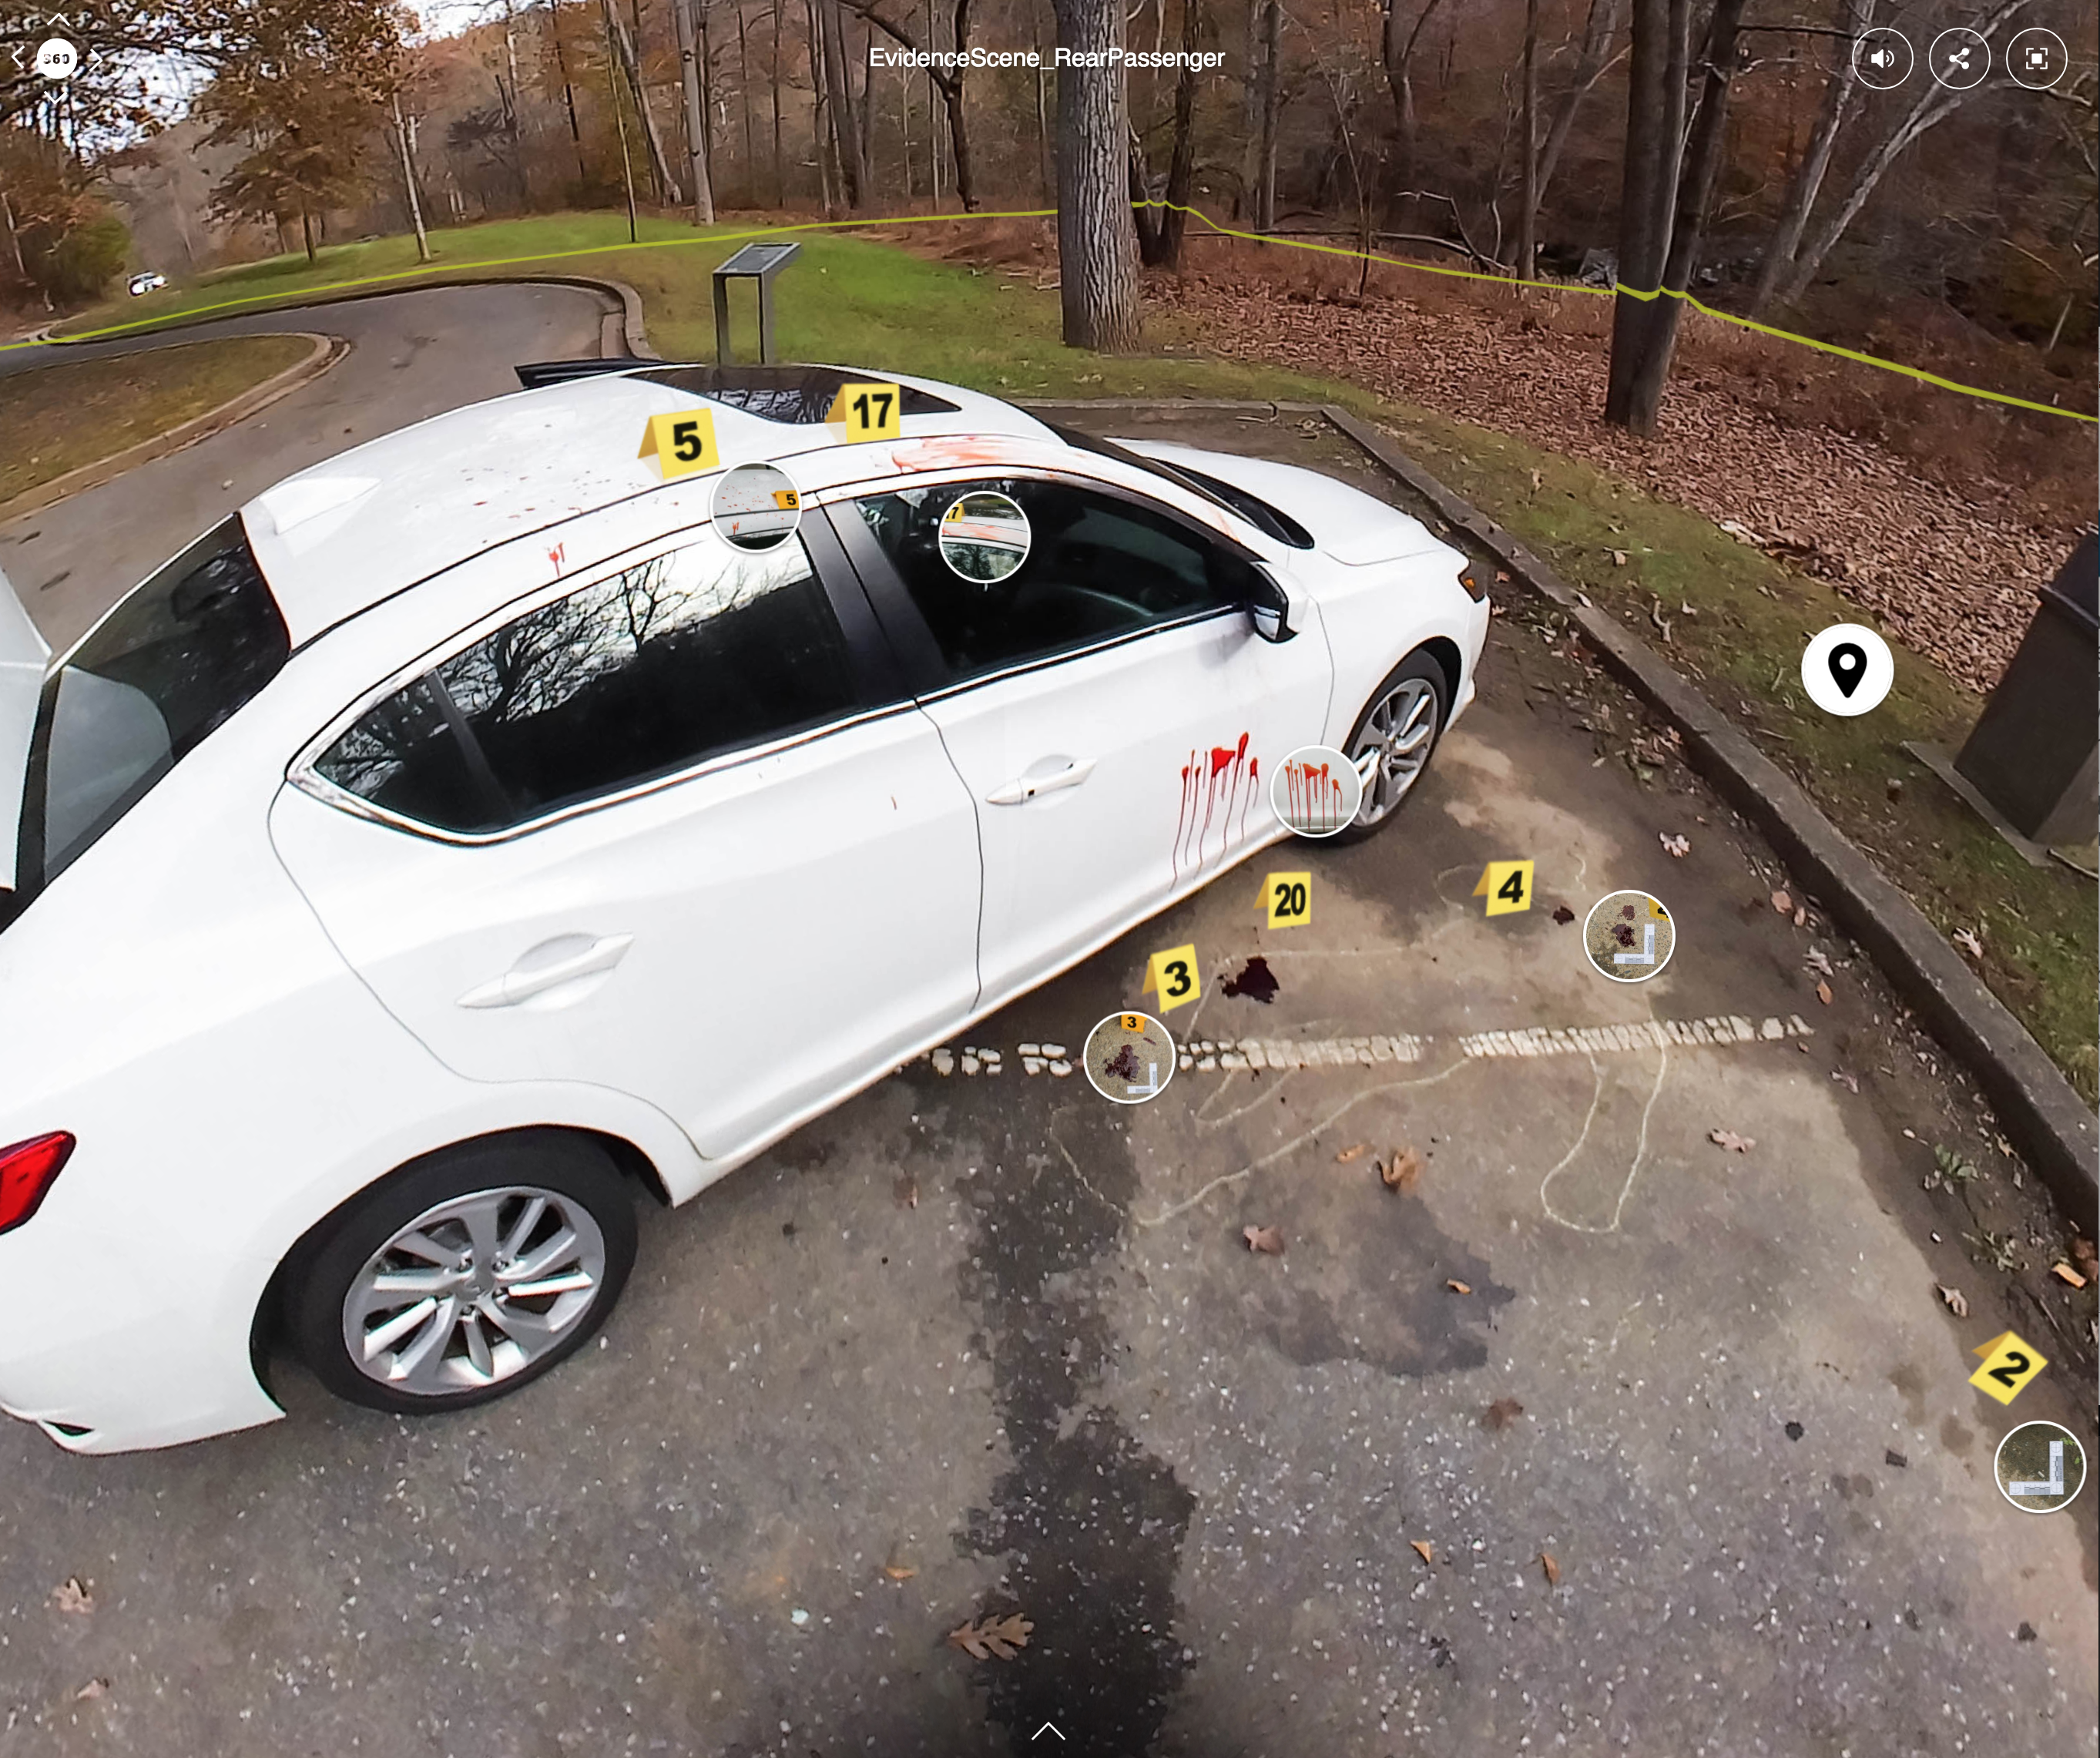 This screenshot shows a screen from the virtual reality simulation. A white car takes up most of the frame, with yellow evidence markers indicating areas where students should zoom in for further inspection.